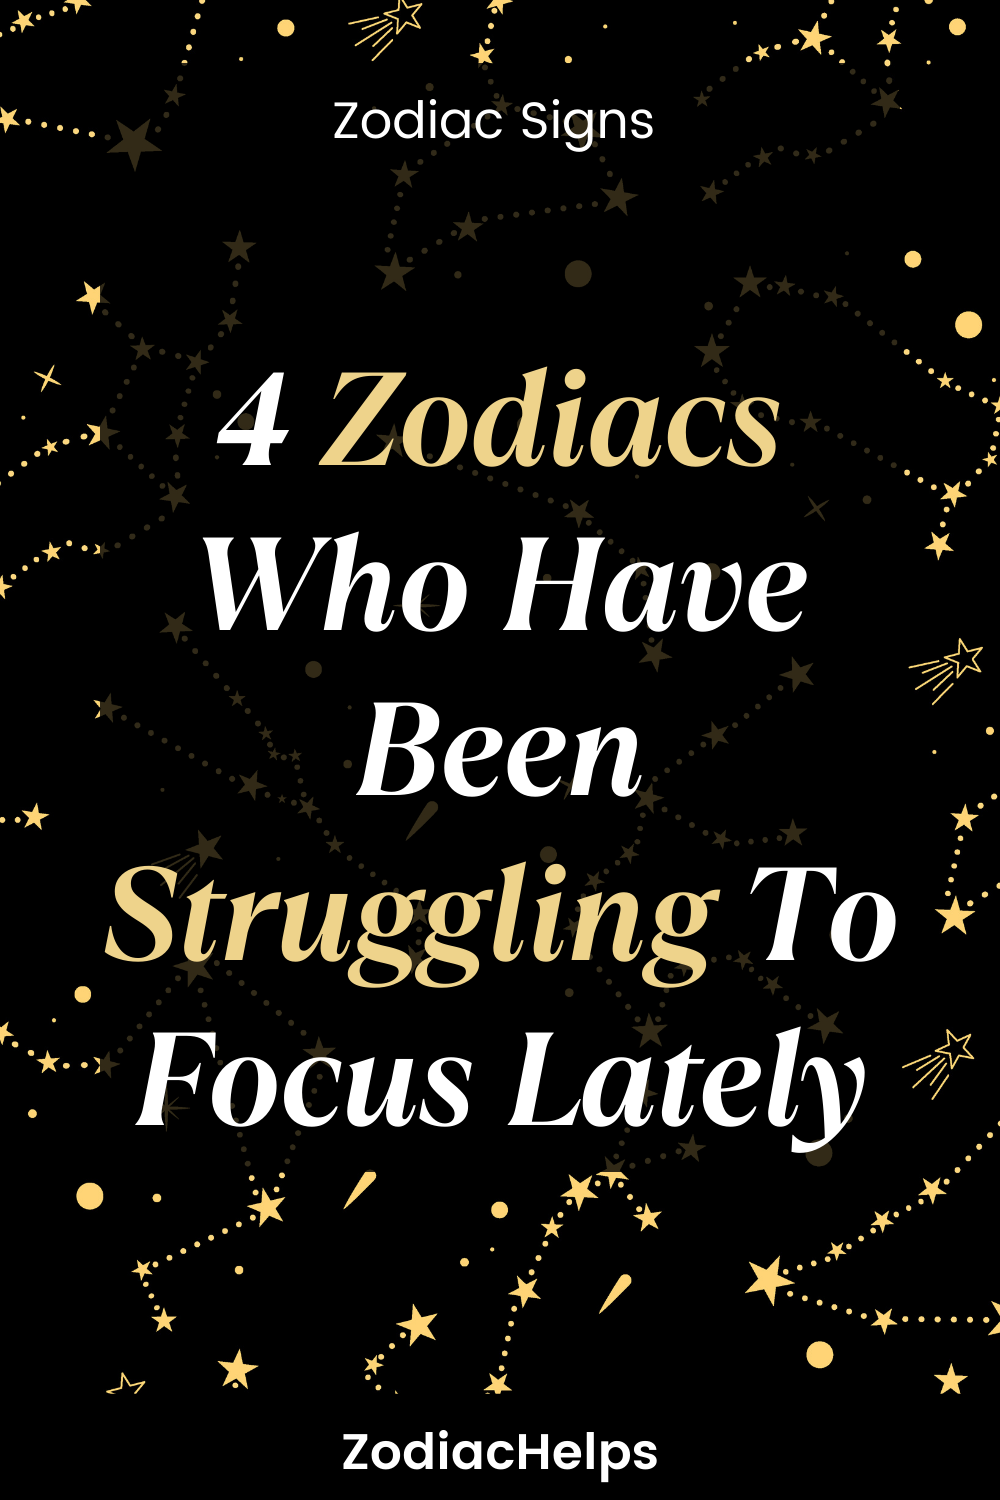 4 Zodiacs Who Have Been Struggling To Focus Lately